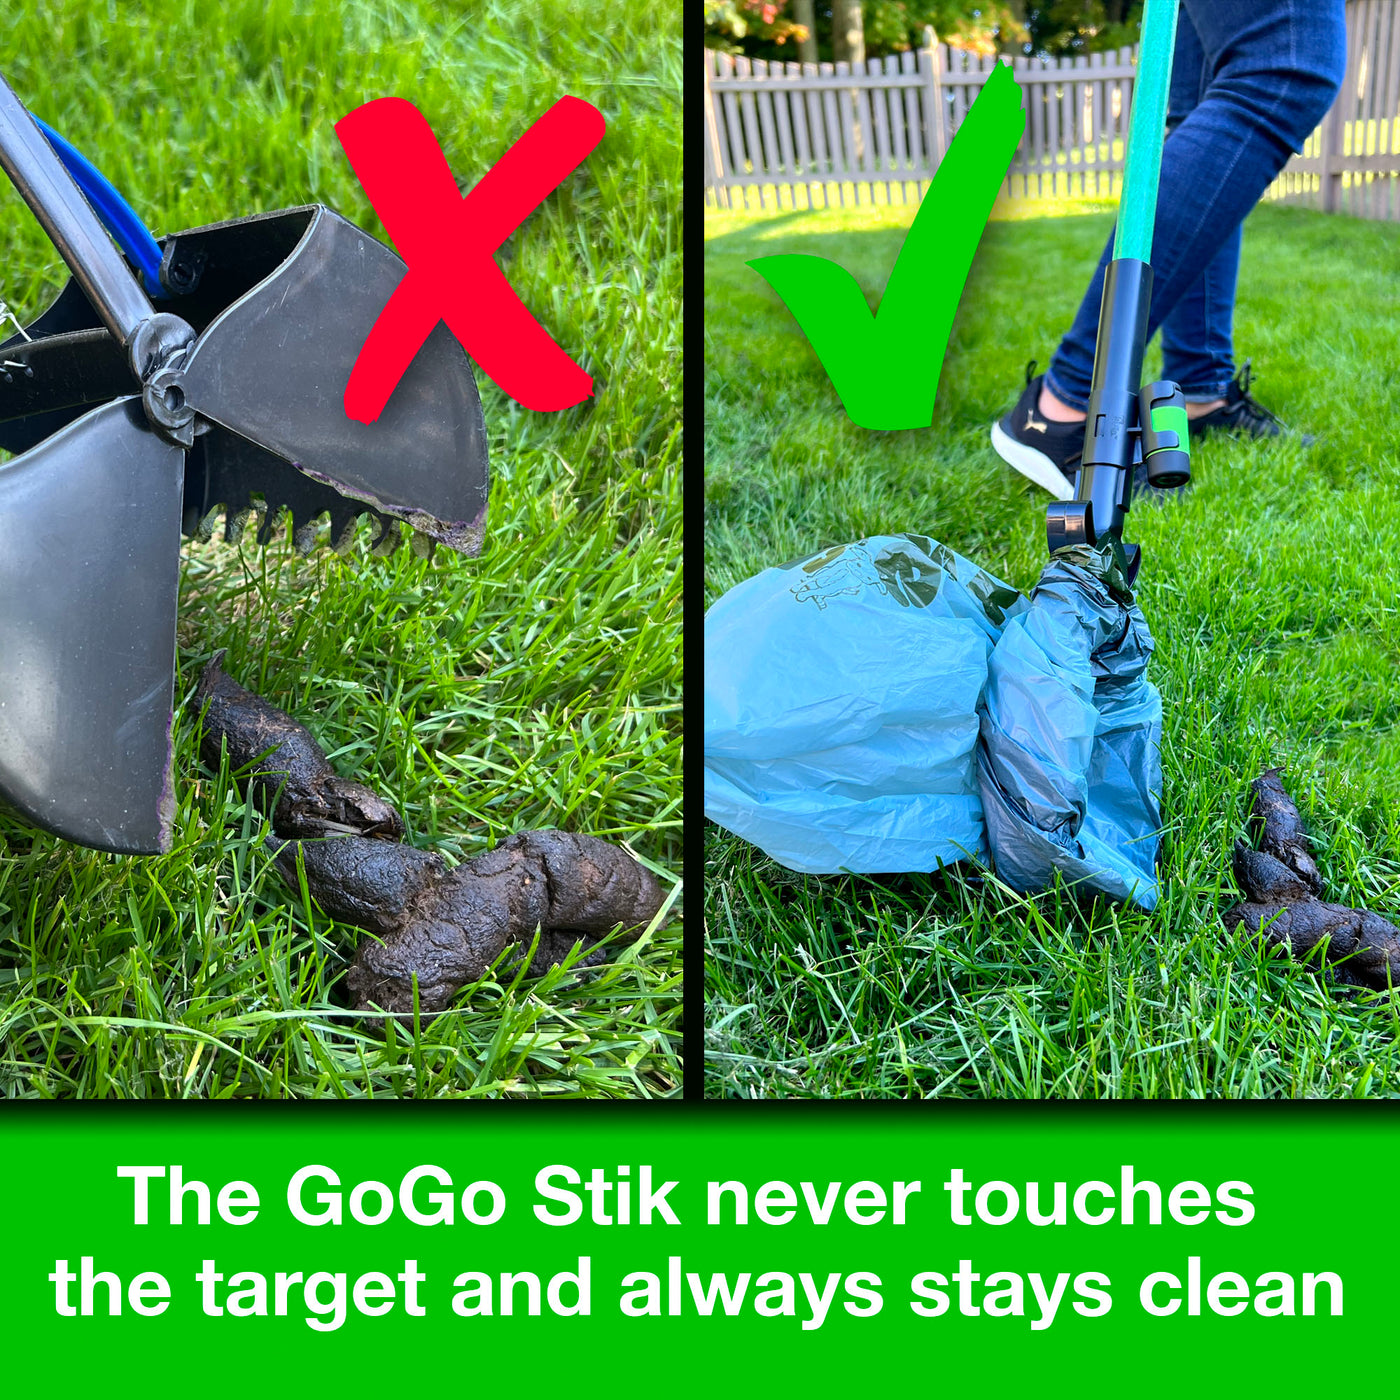 GoGo Stik® XP Pro - Totally Clean Pooper Scooper. Clean, Quick, And Convenient! Super Strong FRP Handle. Bags Keep Hands and Scooper Totally Clean.